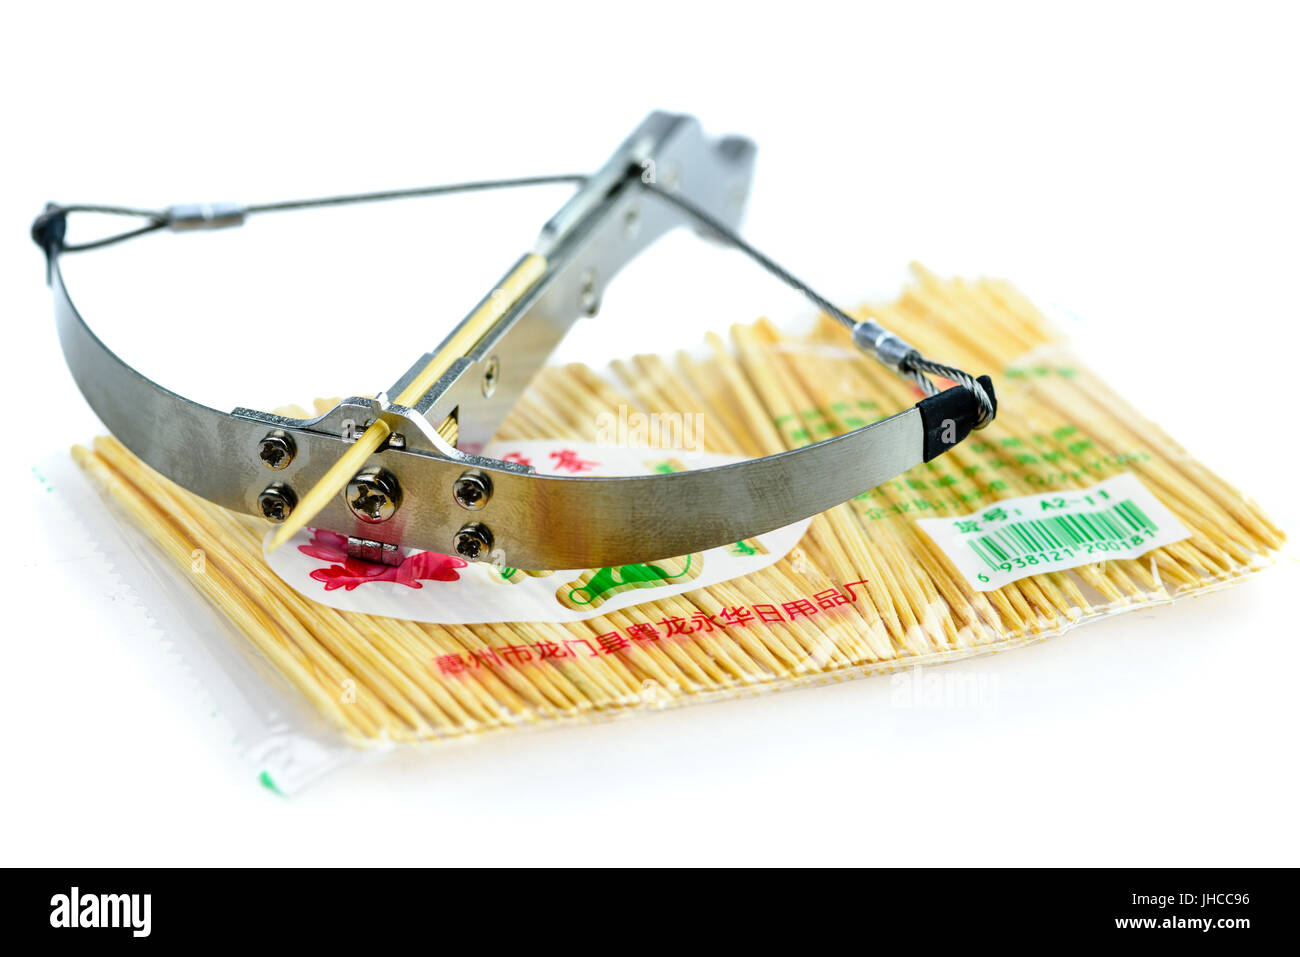 Toothpick catapult, a dangerous steel 'toy' from China which fires toothpicks with enough force to break skin and embed the projectile in an apple. Stock Photo